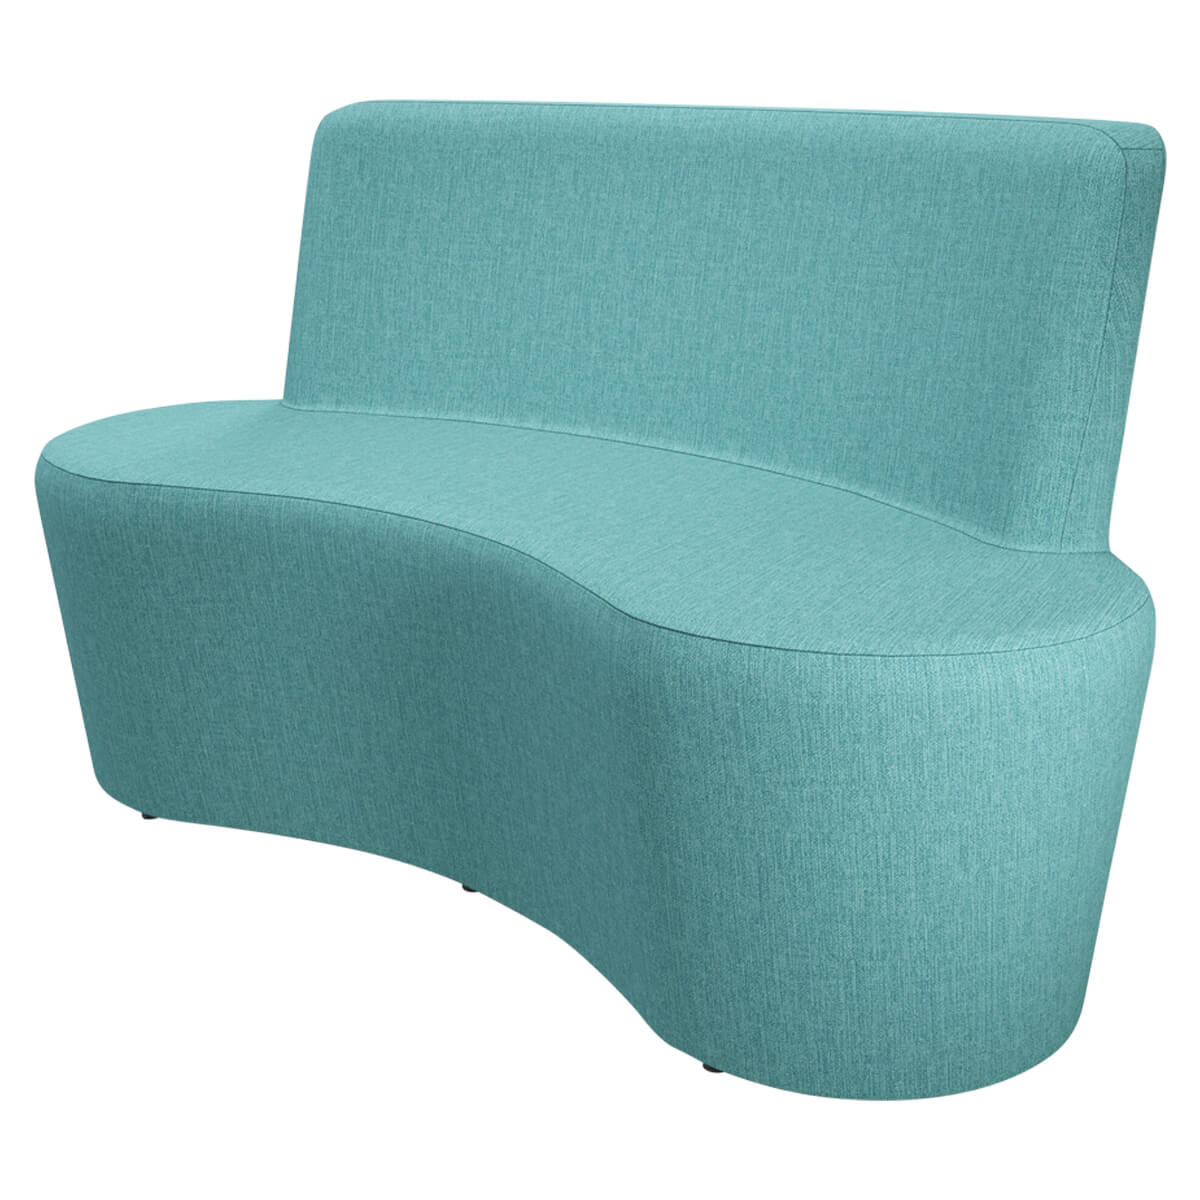 Flowform® Learn Lounge Double Seat - Smith System®